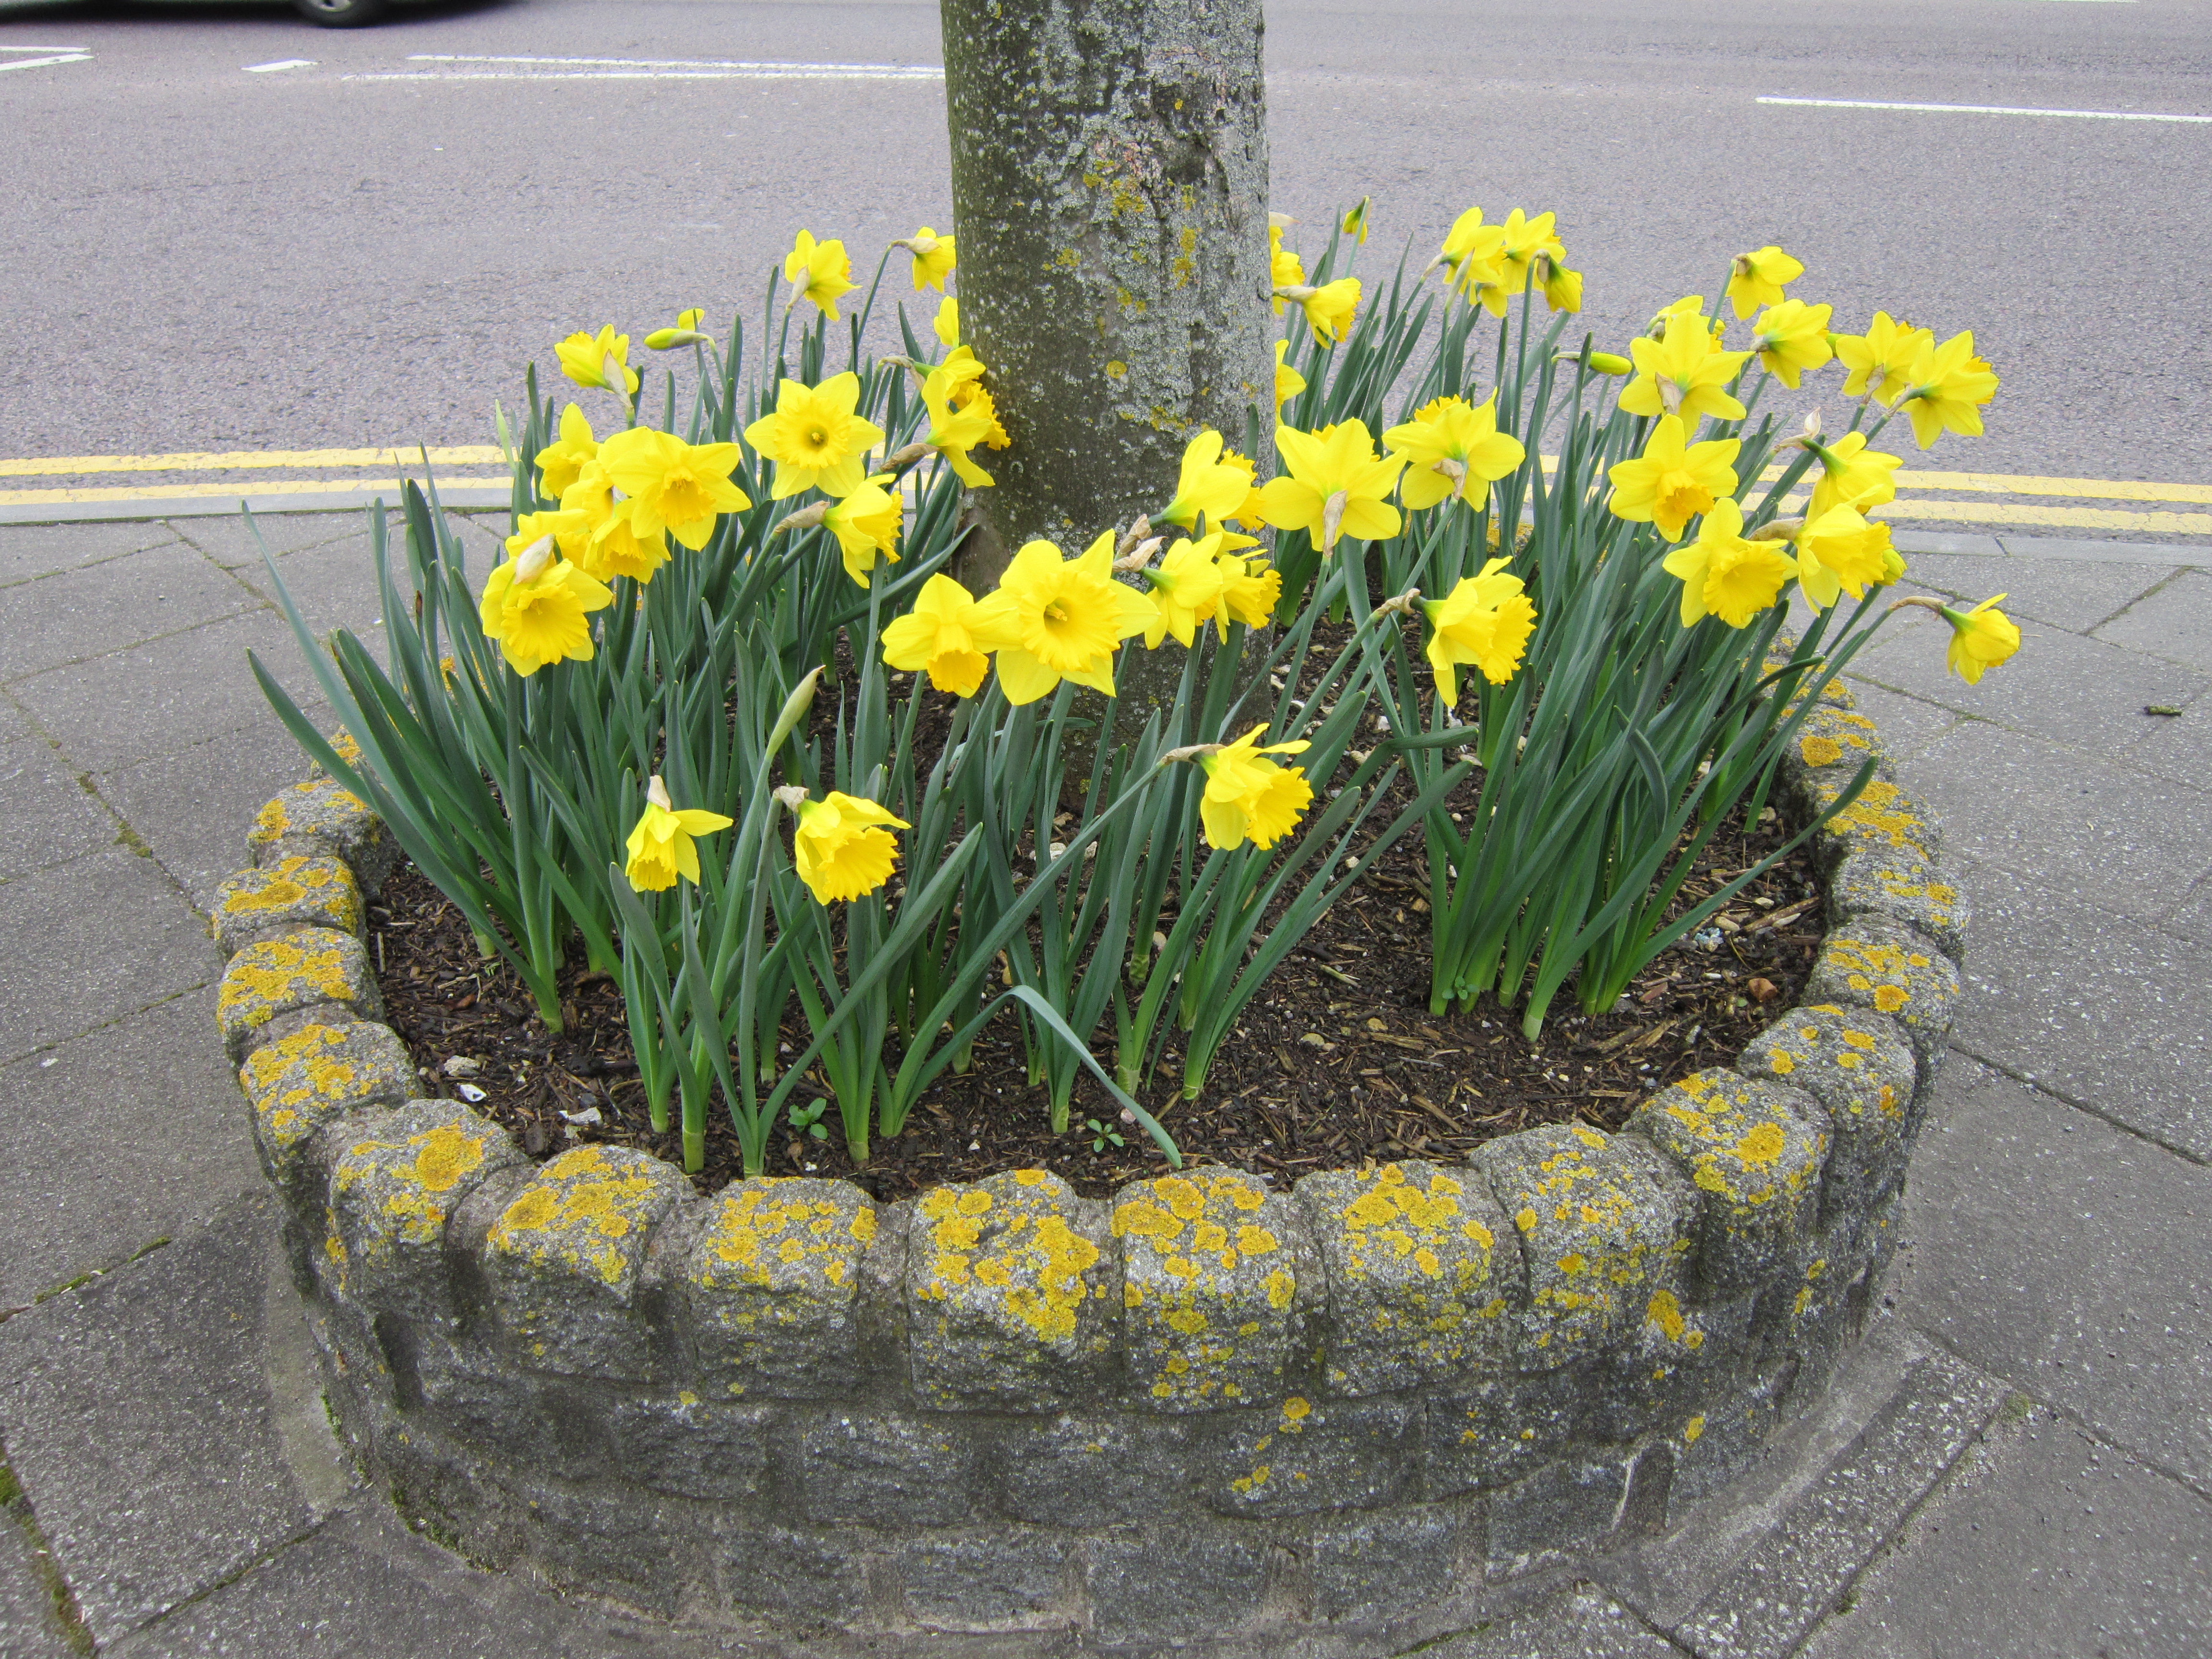 Daffodils in the permanent planter around the base of one of the trees